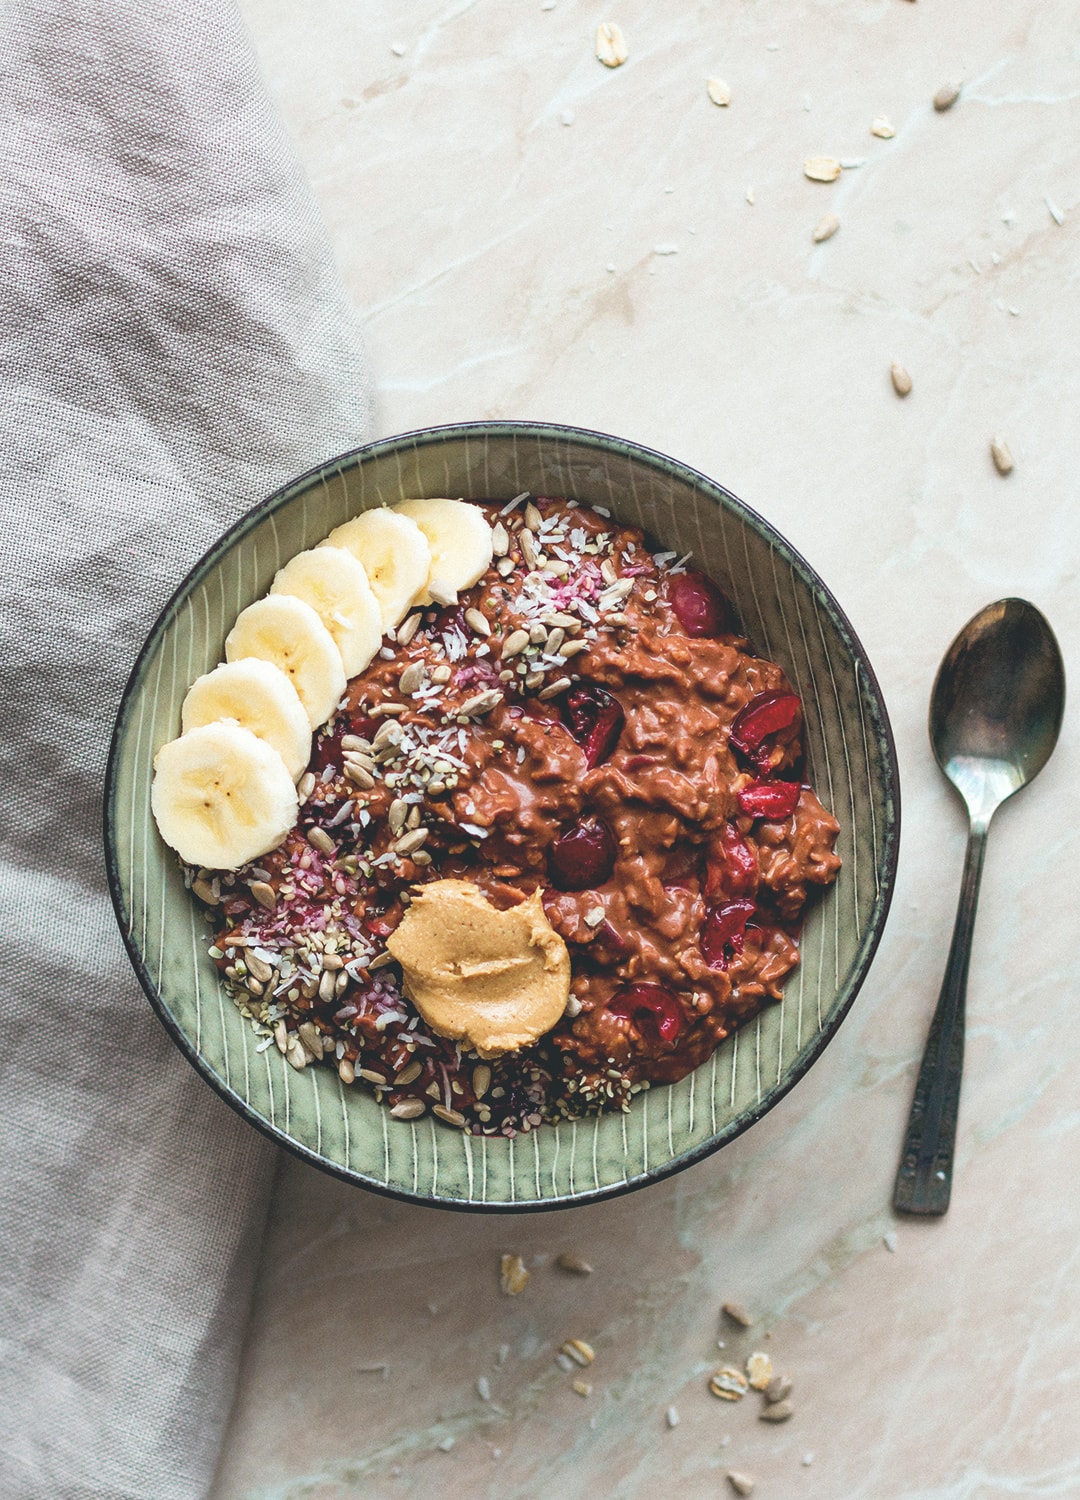 Sour Cherry Chocolate Oatmeal - this oatmeal is creamy, decadent, and chocolatey. It's like having dessert for breakfast, you'll love this recipe. Simply, easy to make & delicious. | thehealthfulideas.com